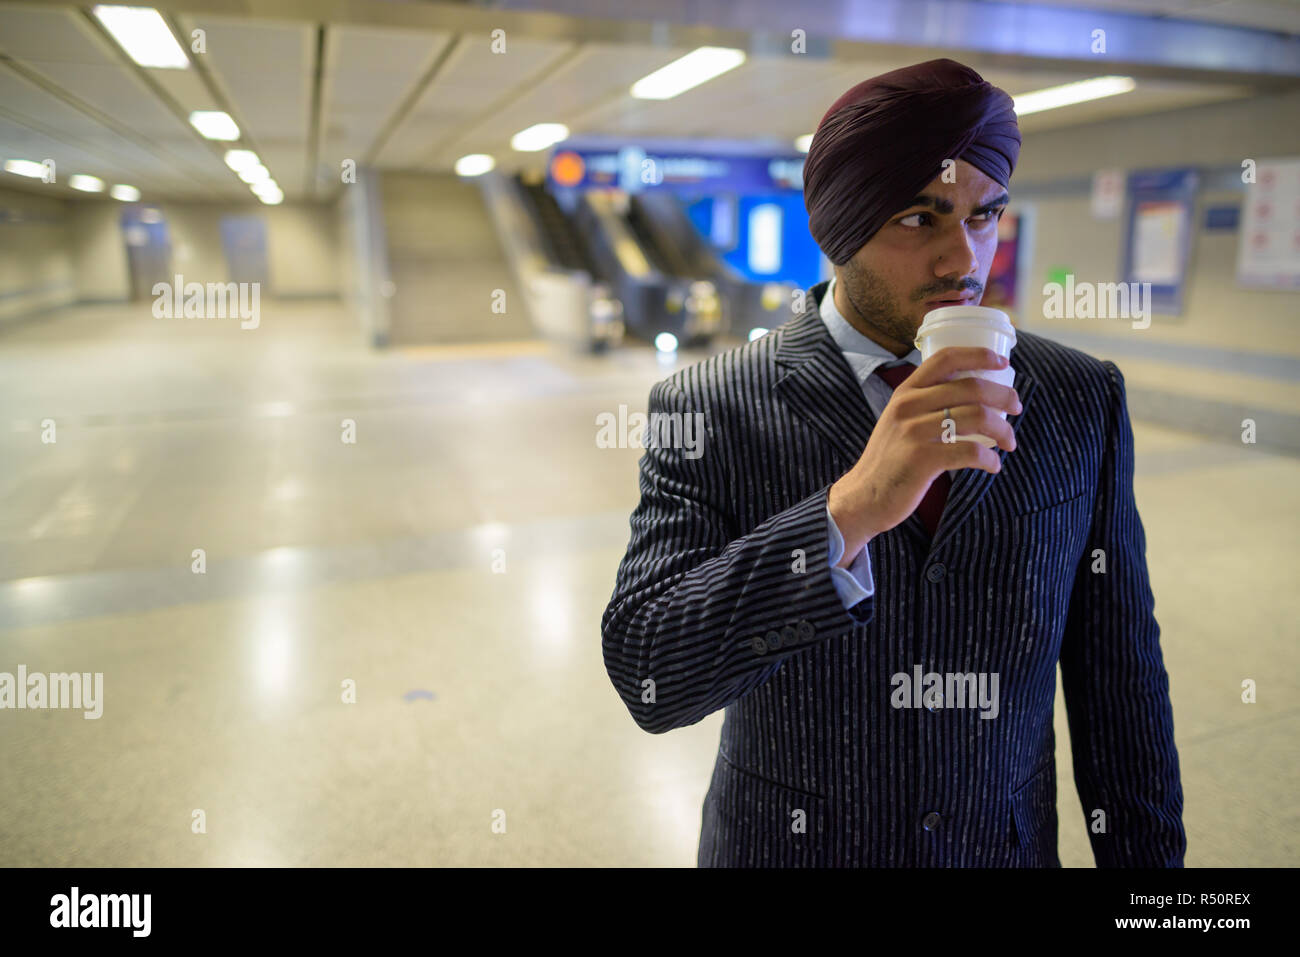 Indian Sikh businessman at subway train station drinking coffee Stock Photo